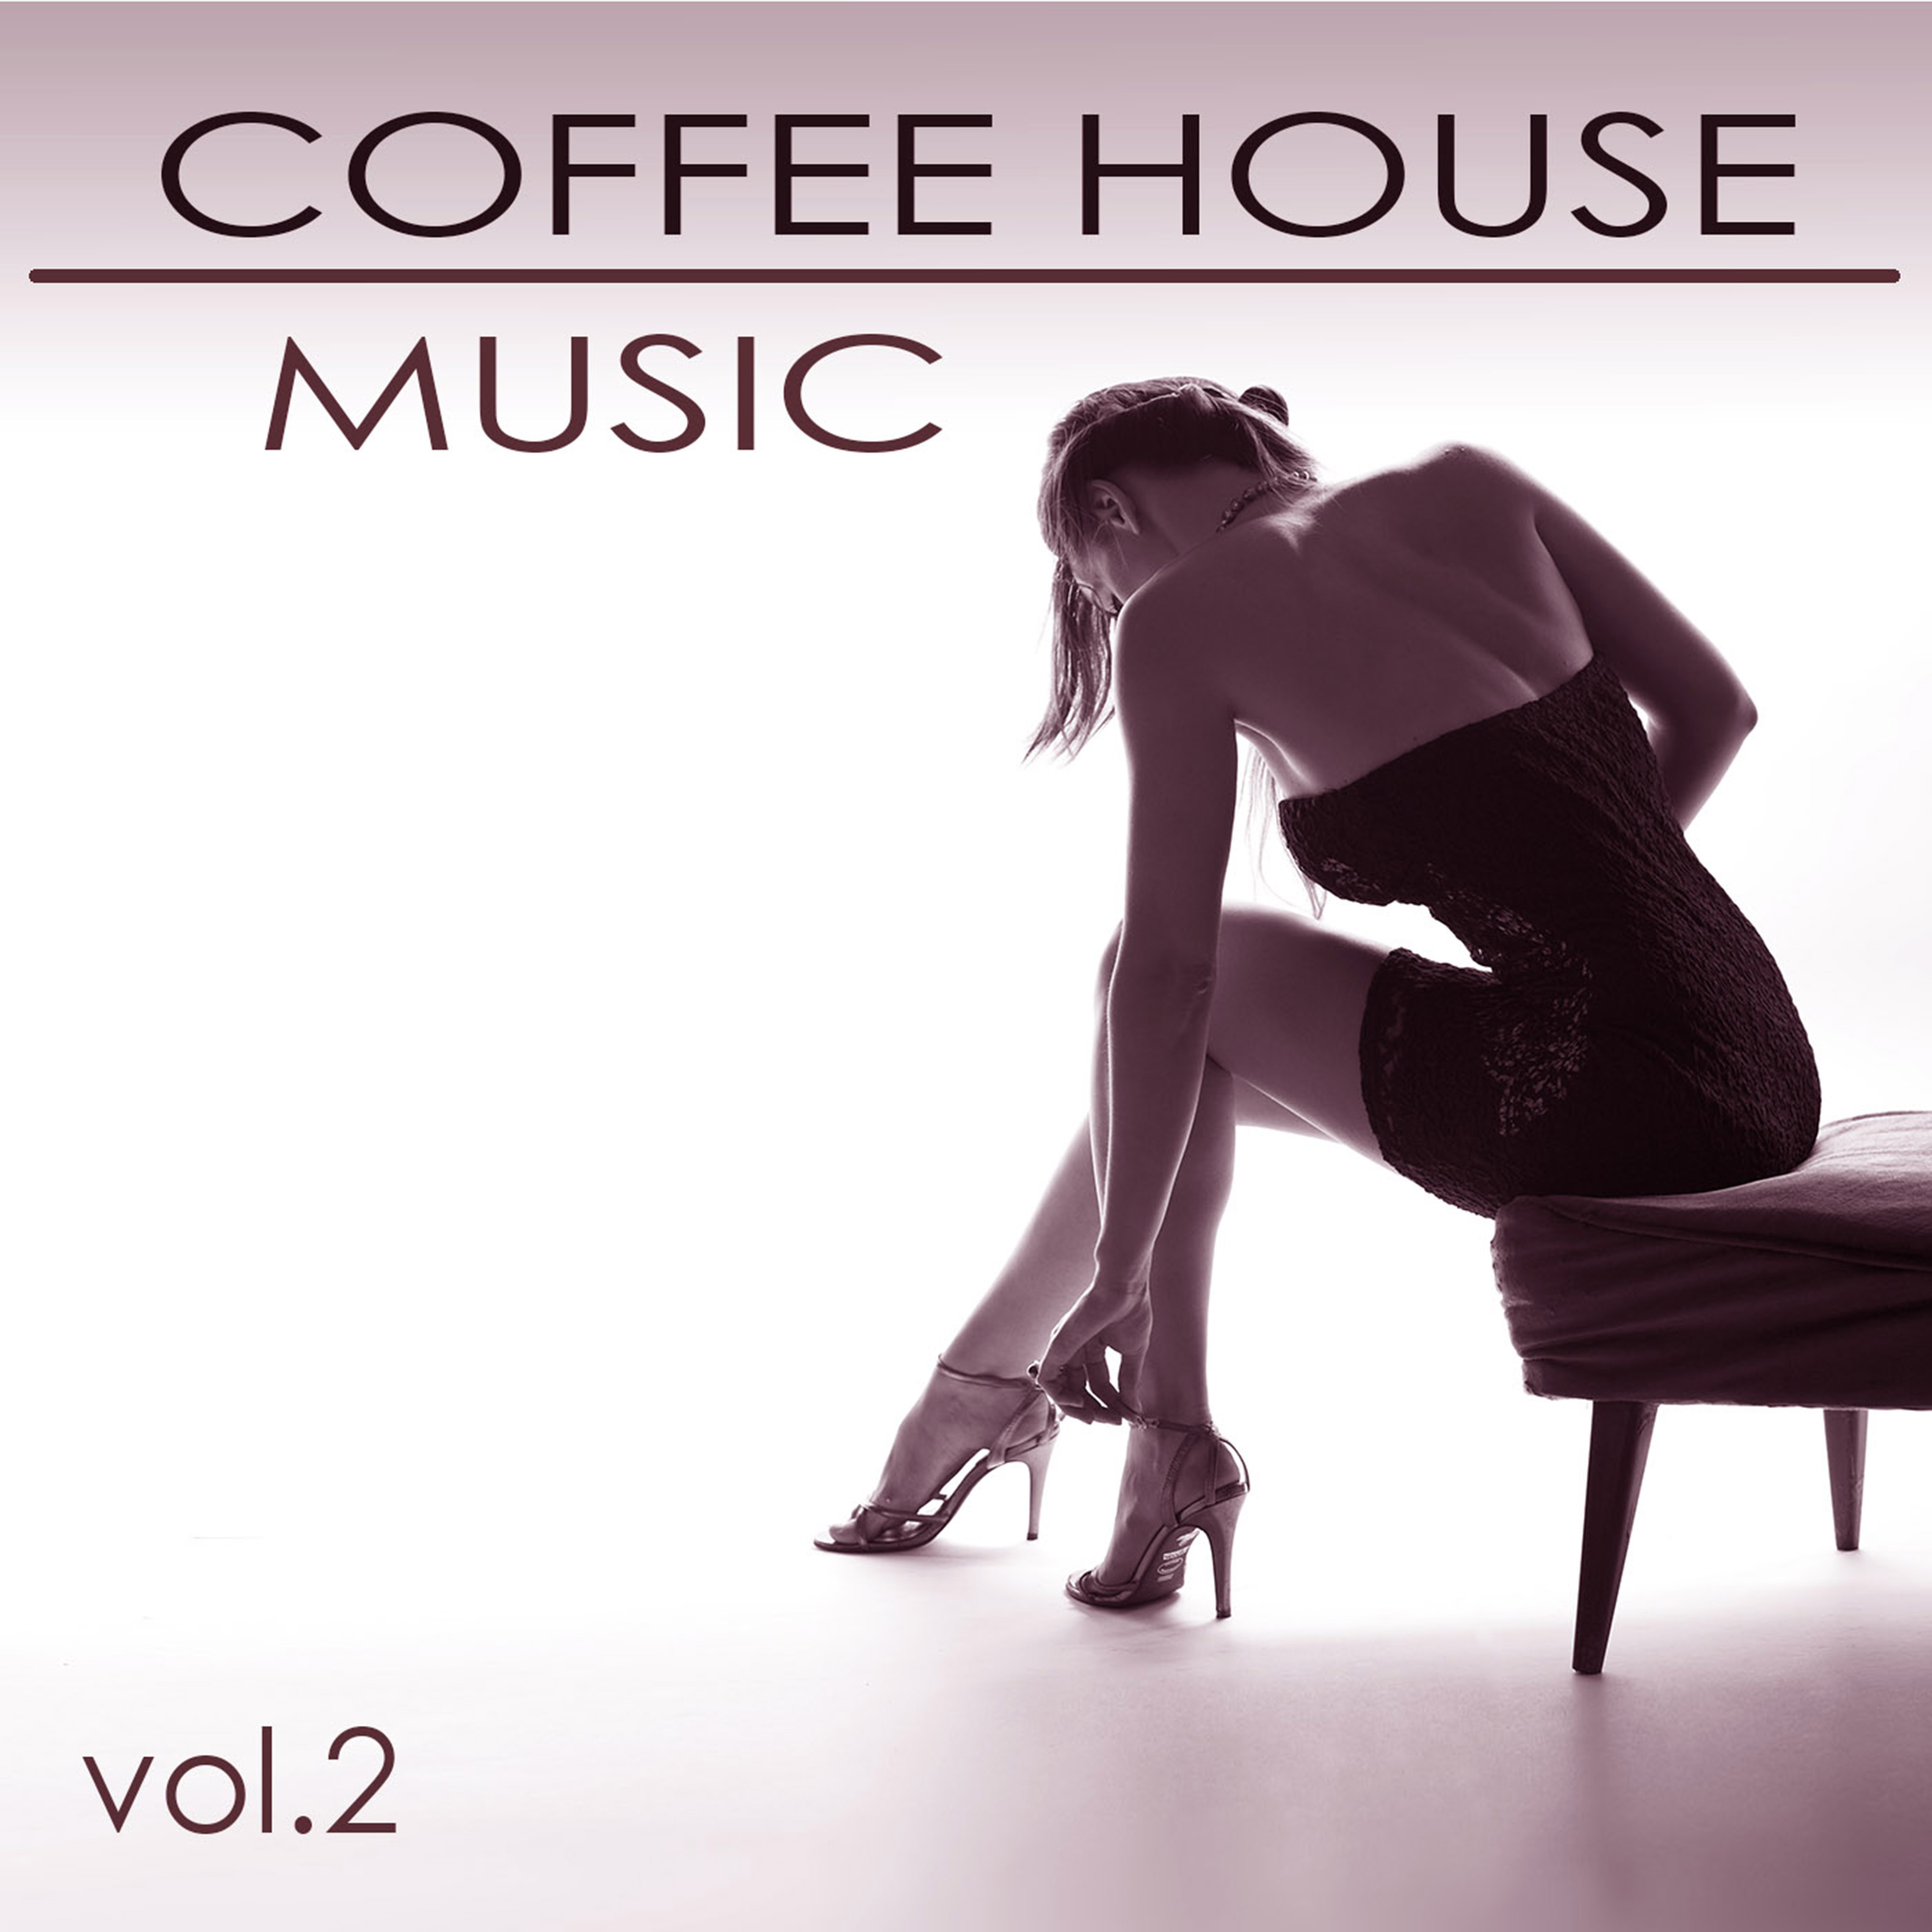 Coffee House Lounge Music from the World, Vol. 2 - Soothing **** Chill Out Music